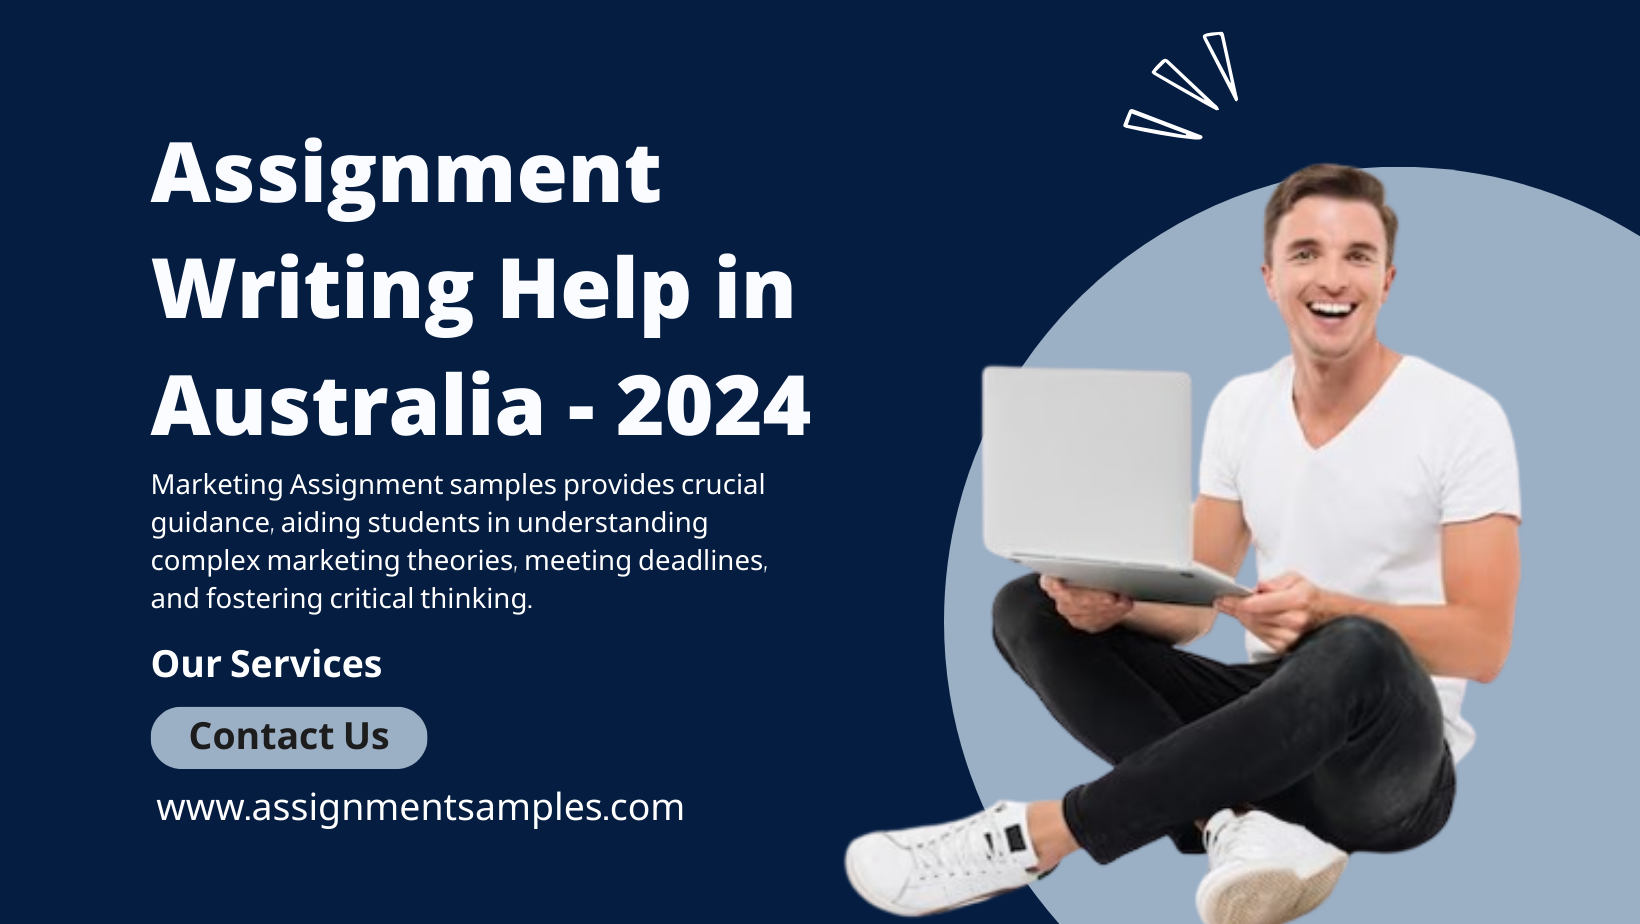 Assignment Writing Help in Australia